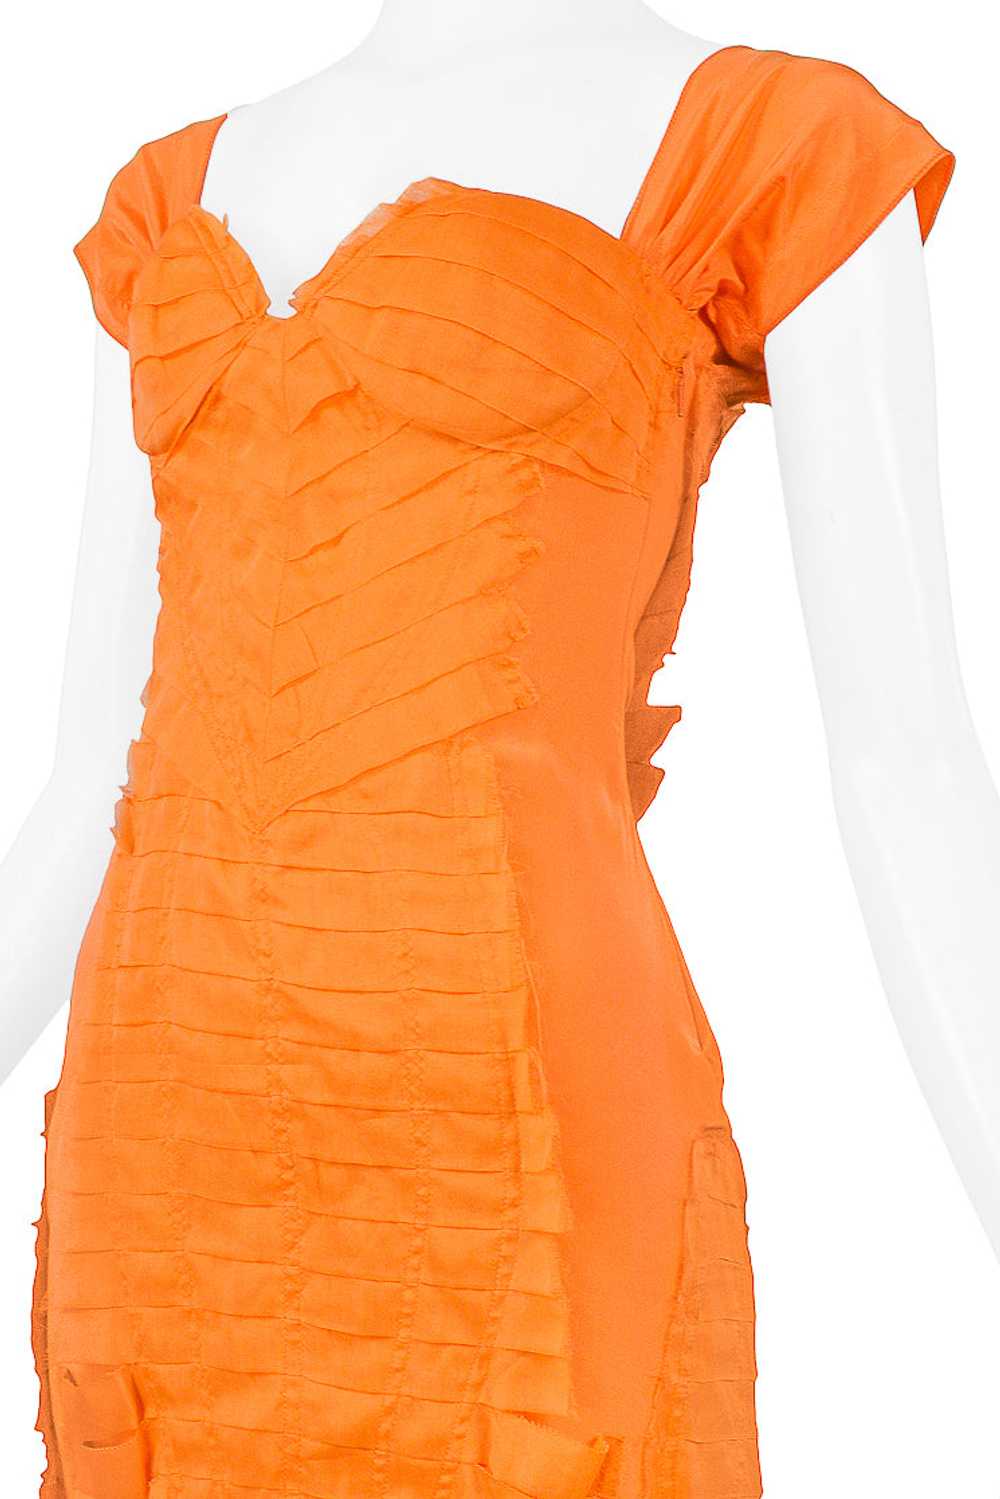 GUCCI BY TOM FORD ORANGE SILK COCKTAIL DRESS 2004 - image 6